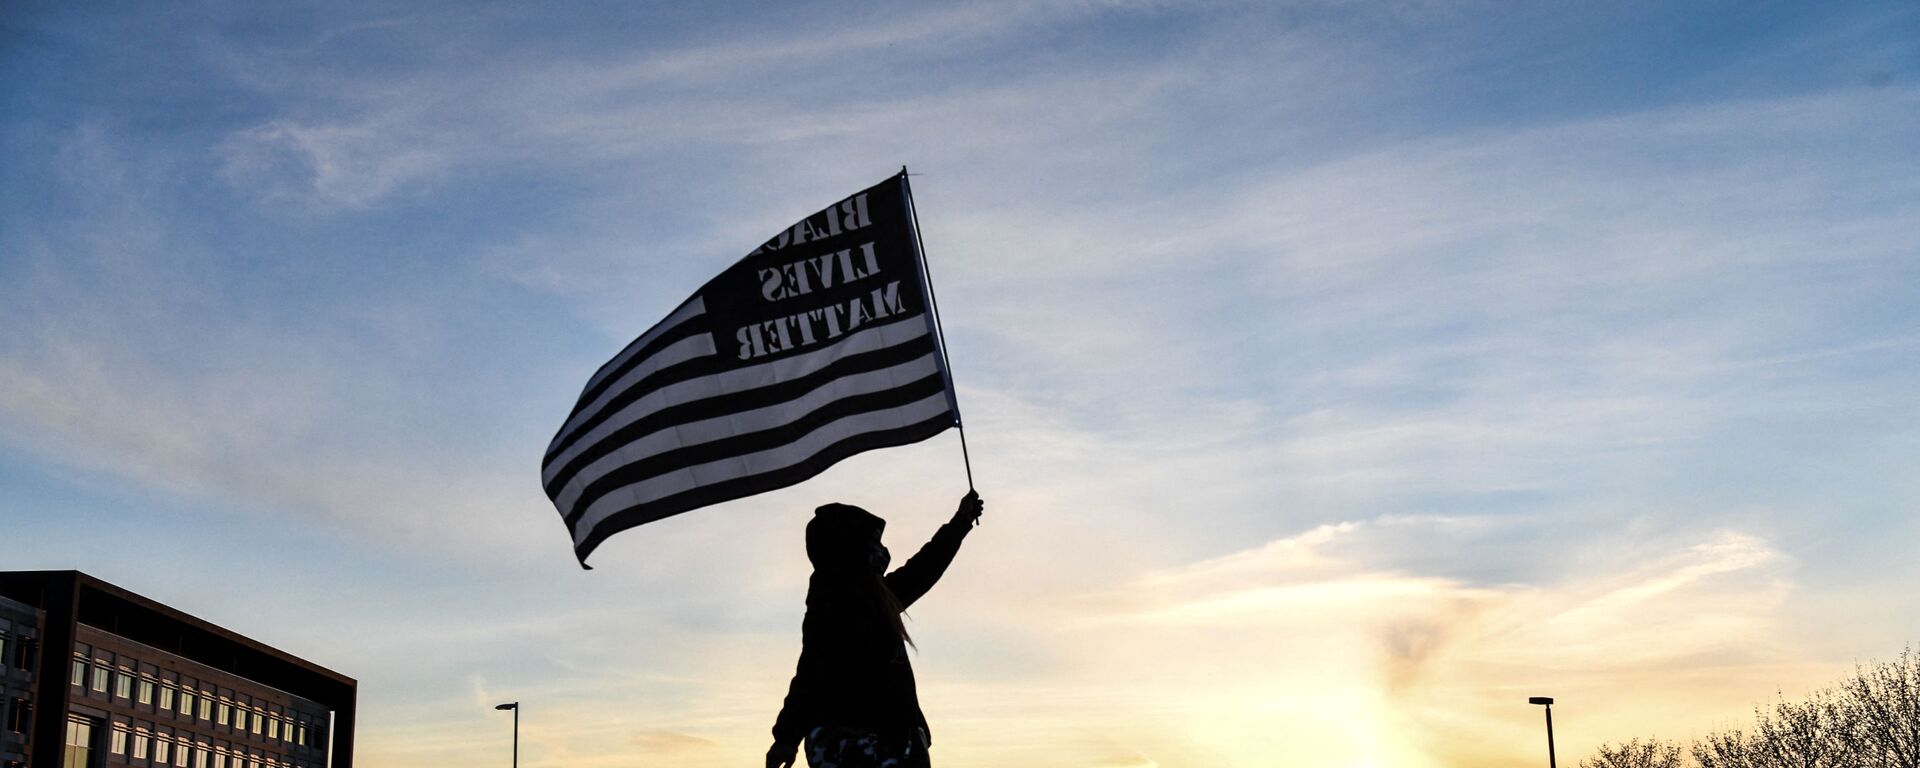 A demonstrator marches, holding a Black Lives Matter flag, during the sixth night of protests over the shooting death of Daunte Wright by a police officer in Brooklyn Center, Minnesota on April 16, 2021 - Sputnik International, 1920, 23.11.2021